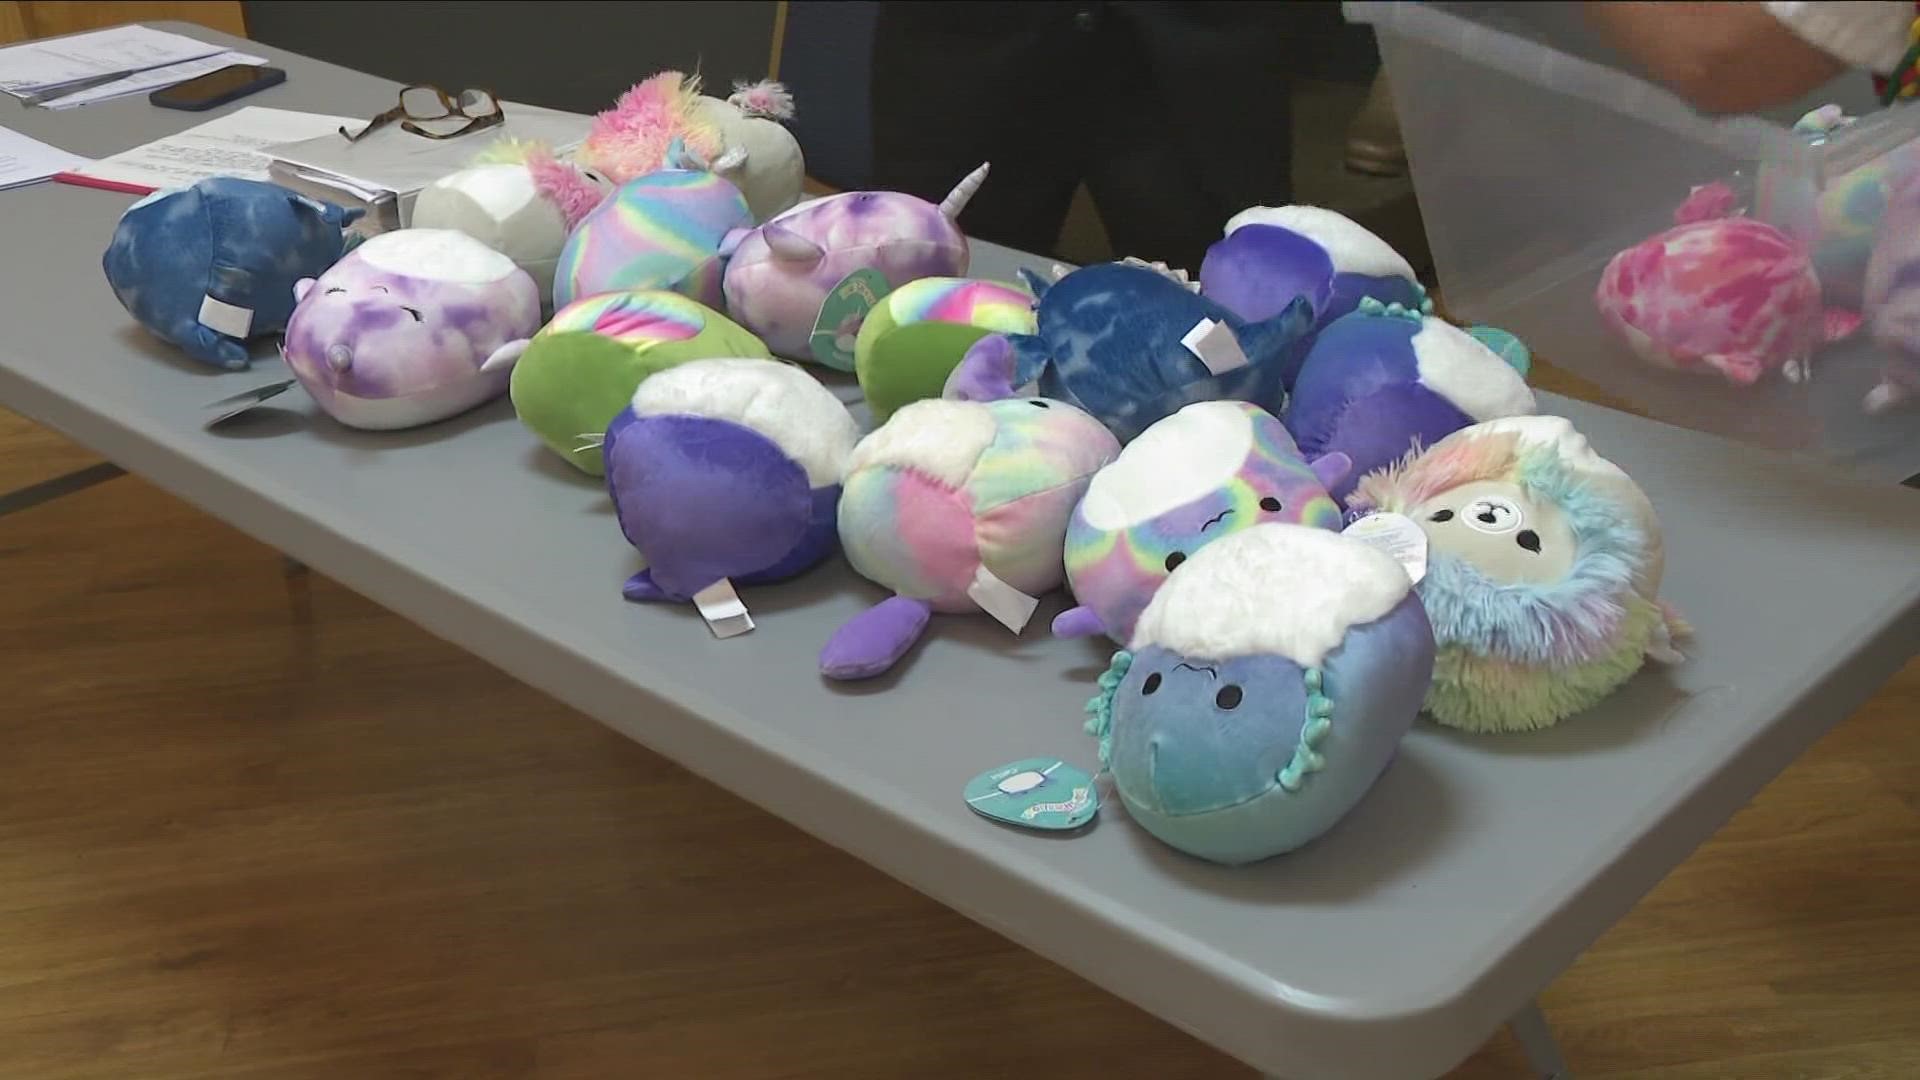 To thank the hospital, they raised money by selling lemonade this summer. They used the money to buy plush toys, which they then donated to the hospital.